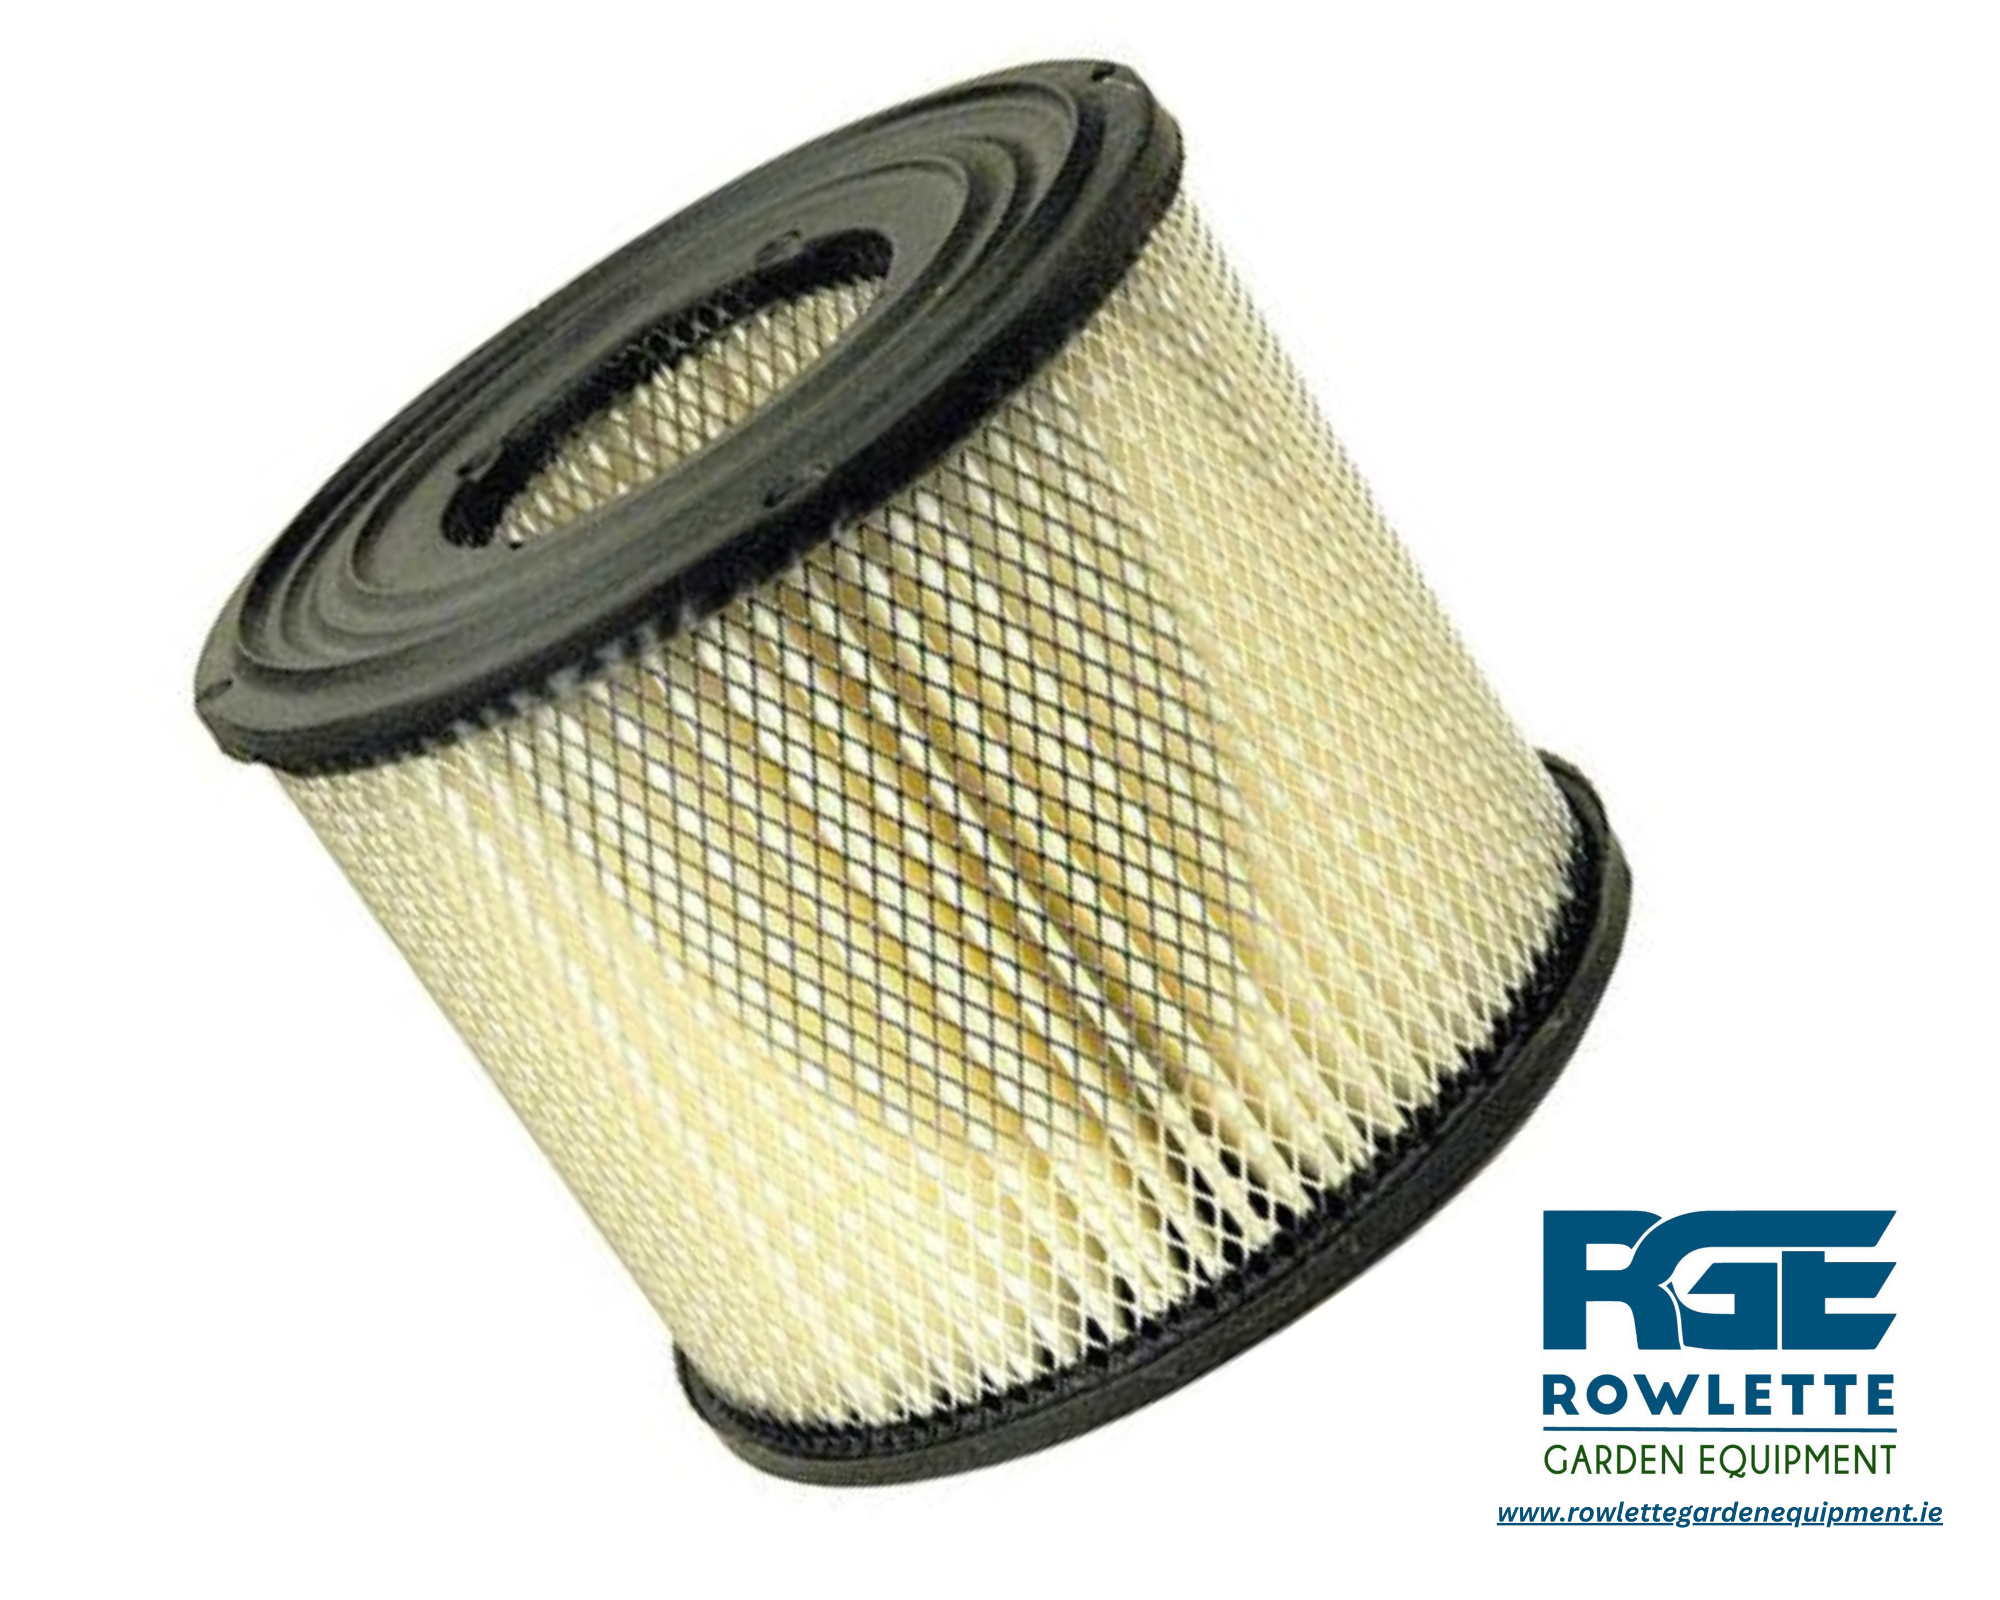 Replacement Briggs & Stratton 7-18 Hp Horizontal & Vertical Shaft Engines Air Filter